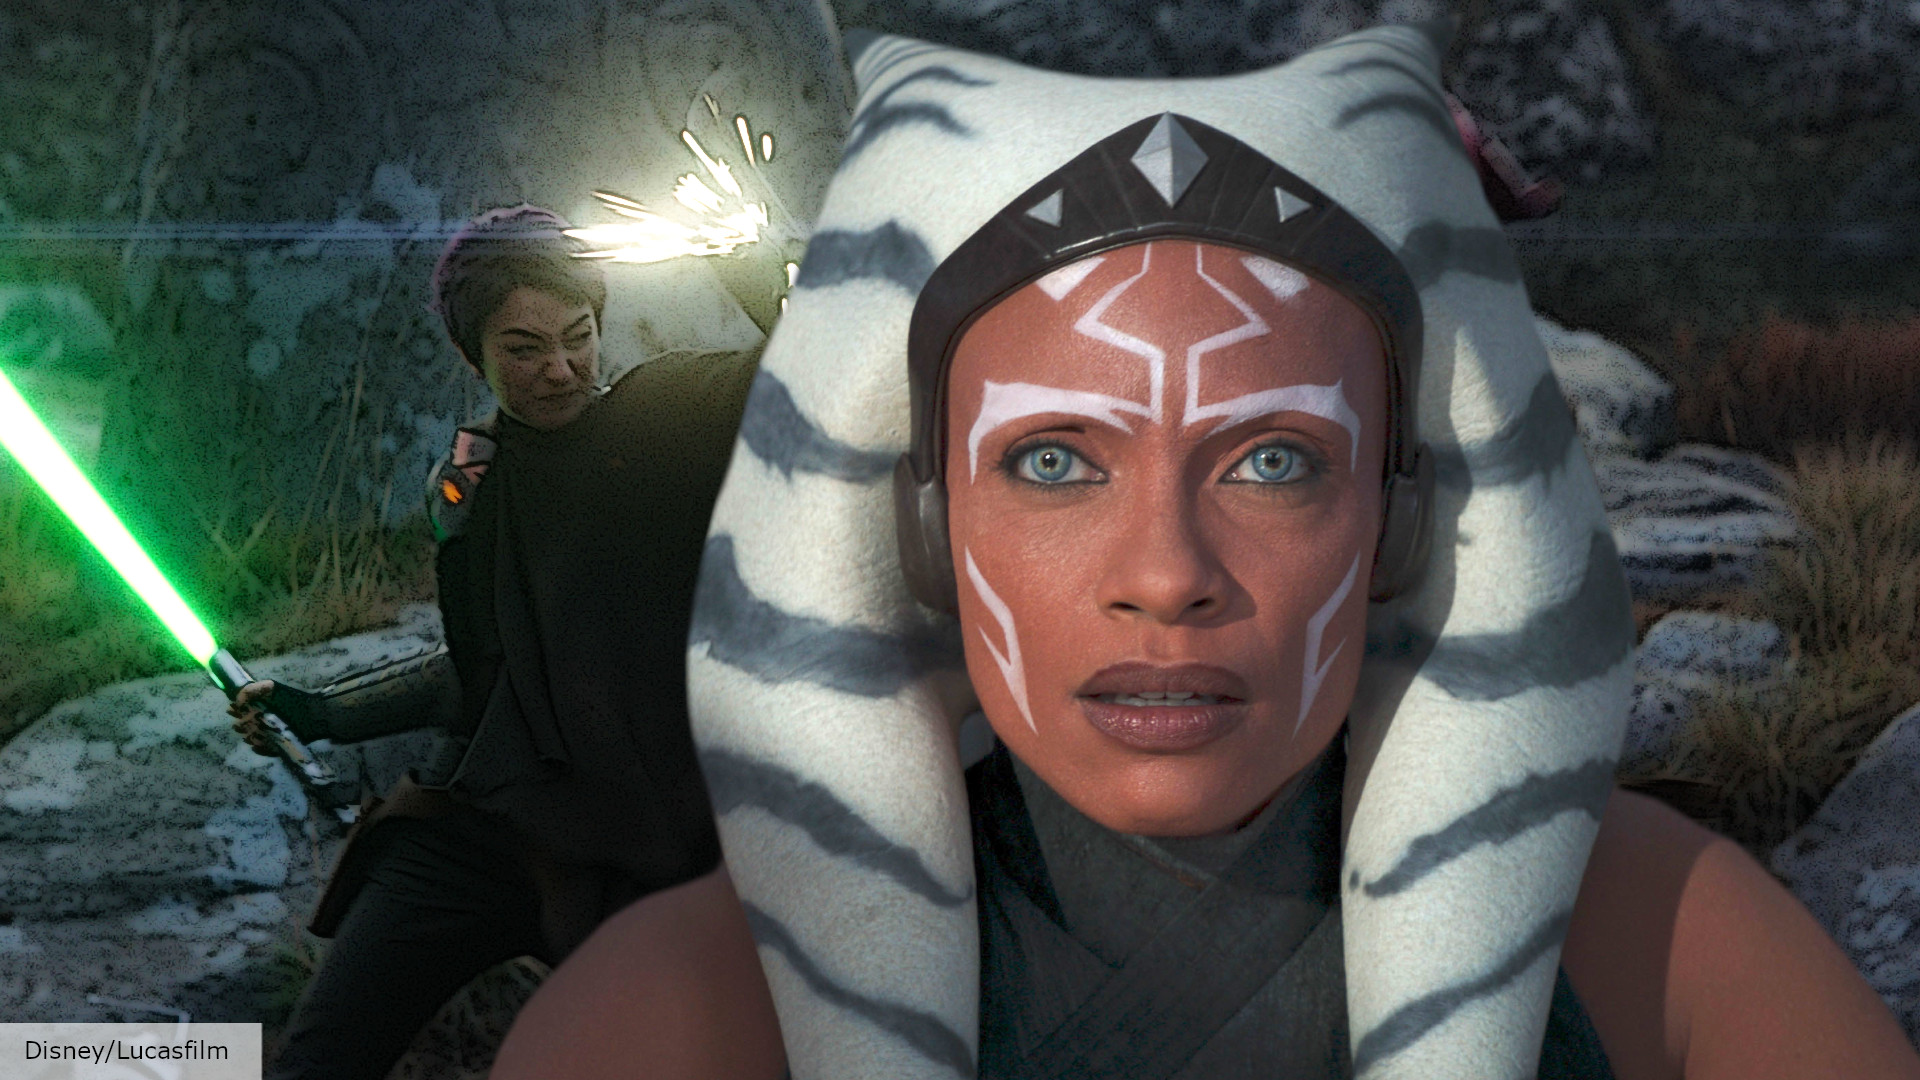 Ahsoka season 2 release date speculation, cast, plot, and more news